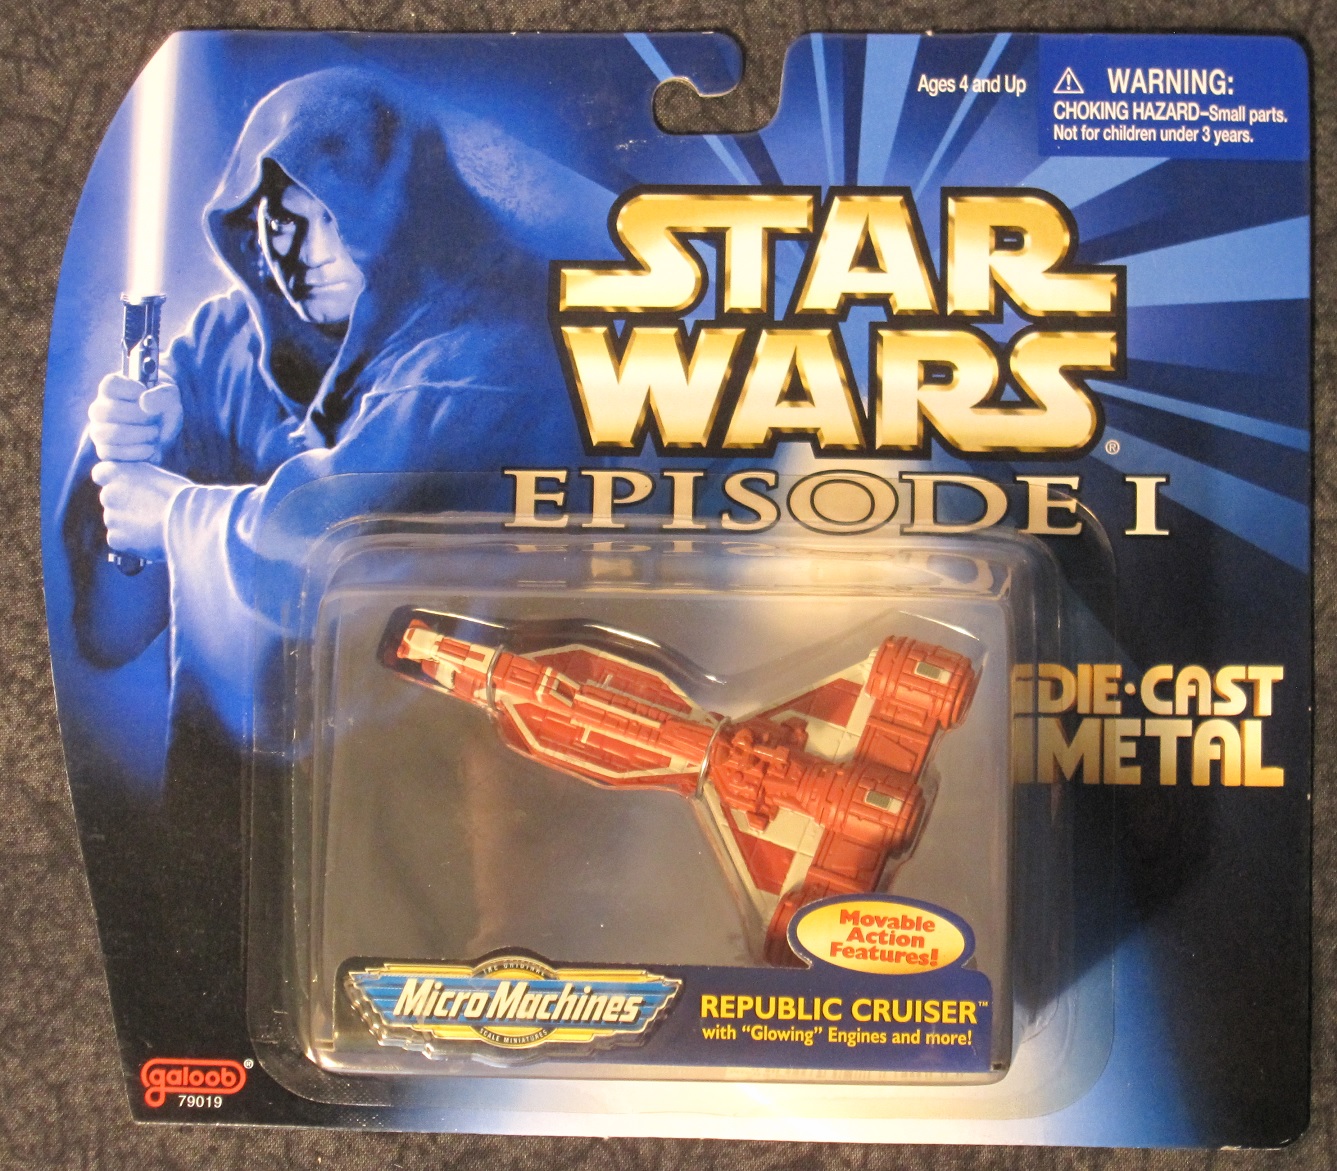 Star Wars Episode 1 Darth Maul With Sith Infiltrator Hasbro 1999 Ep1 for sale online 